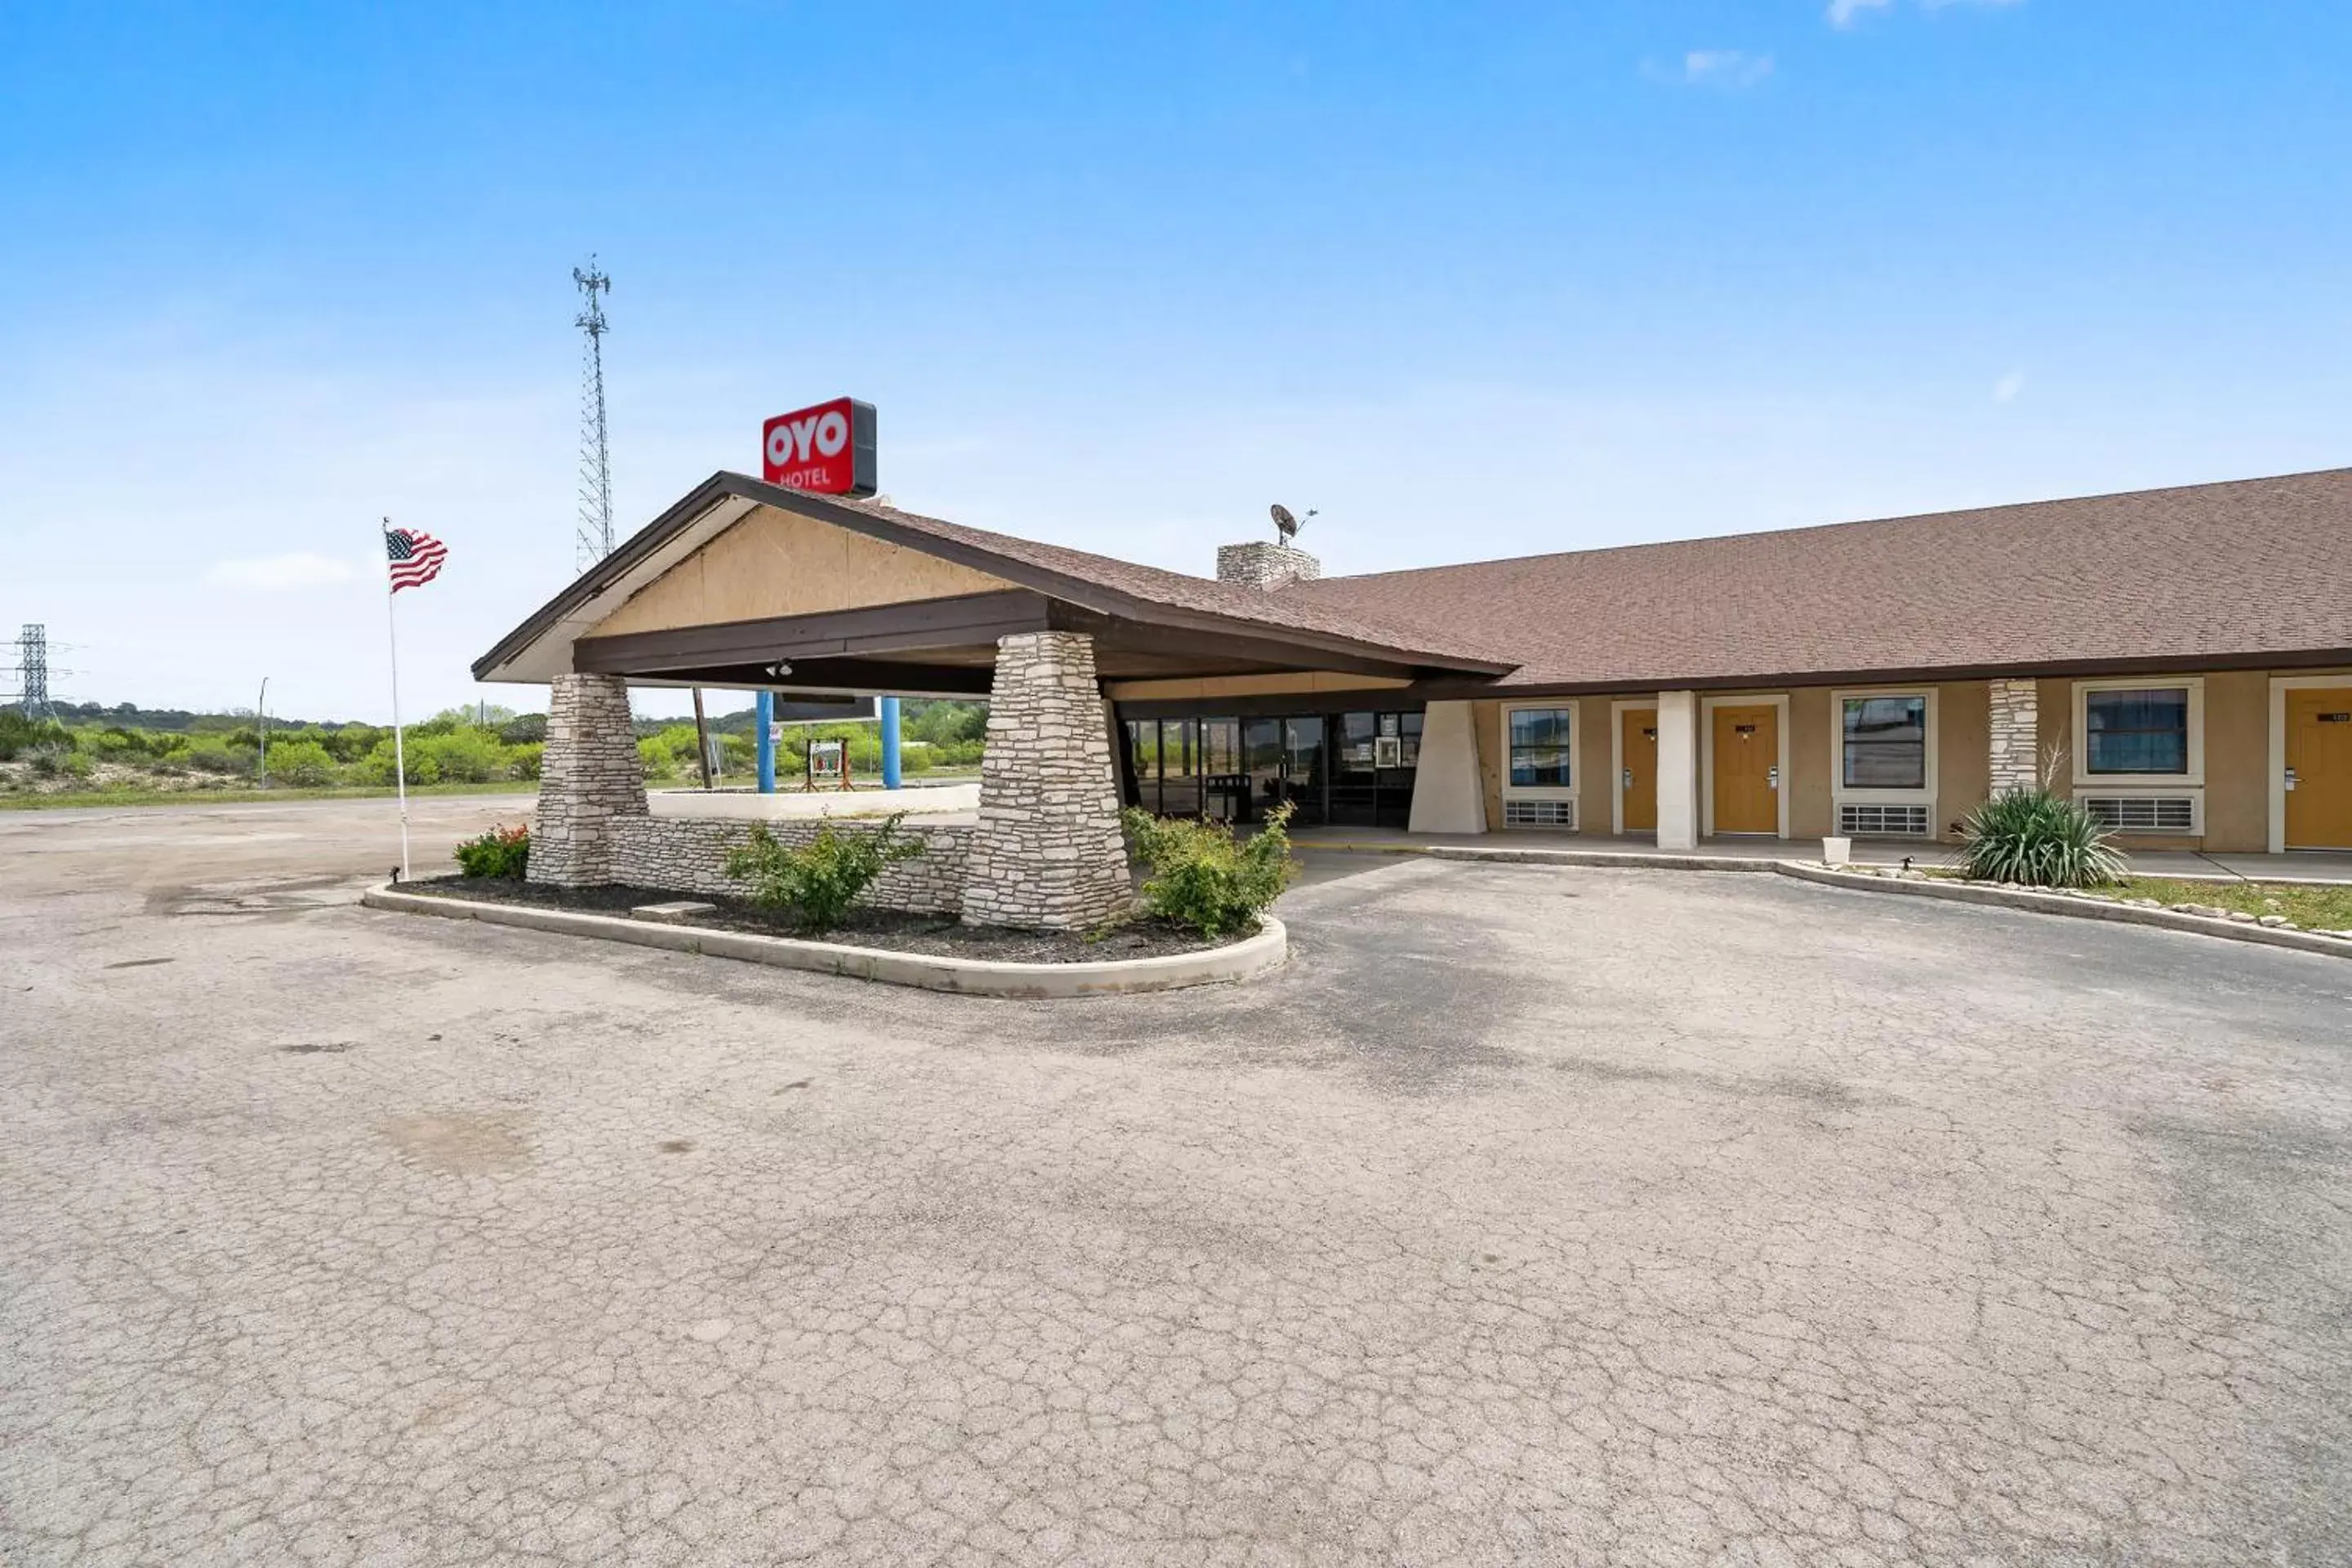 Property Building in OYO Hotel Junction TX I-10